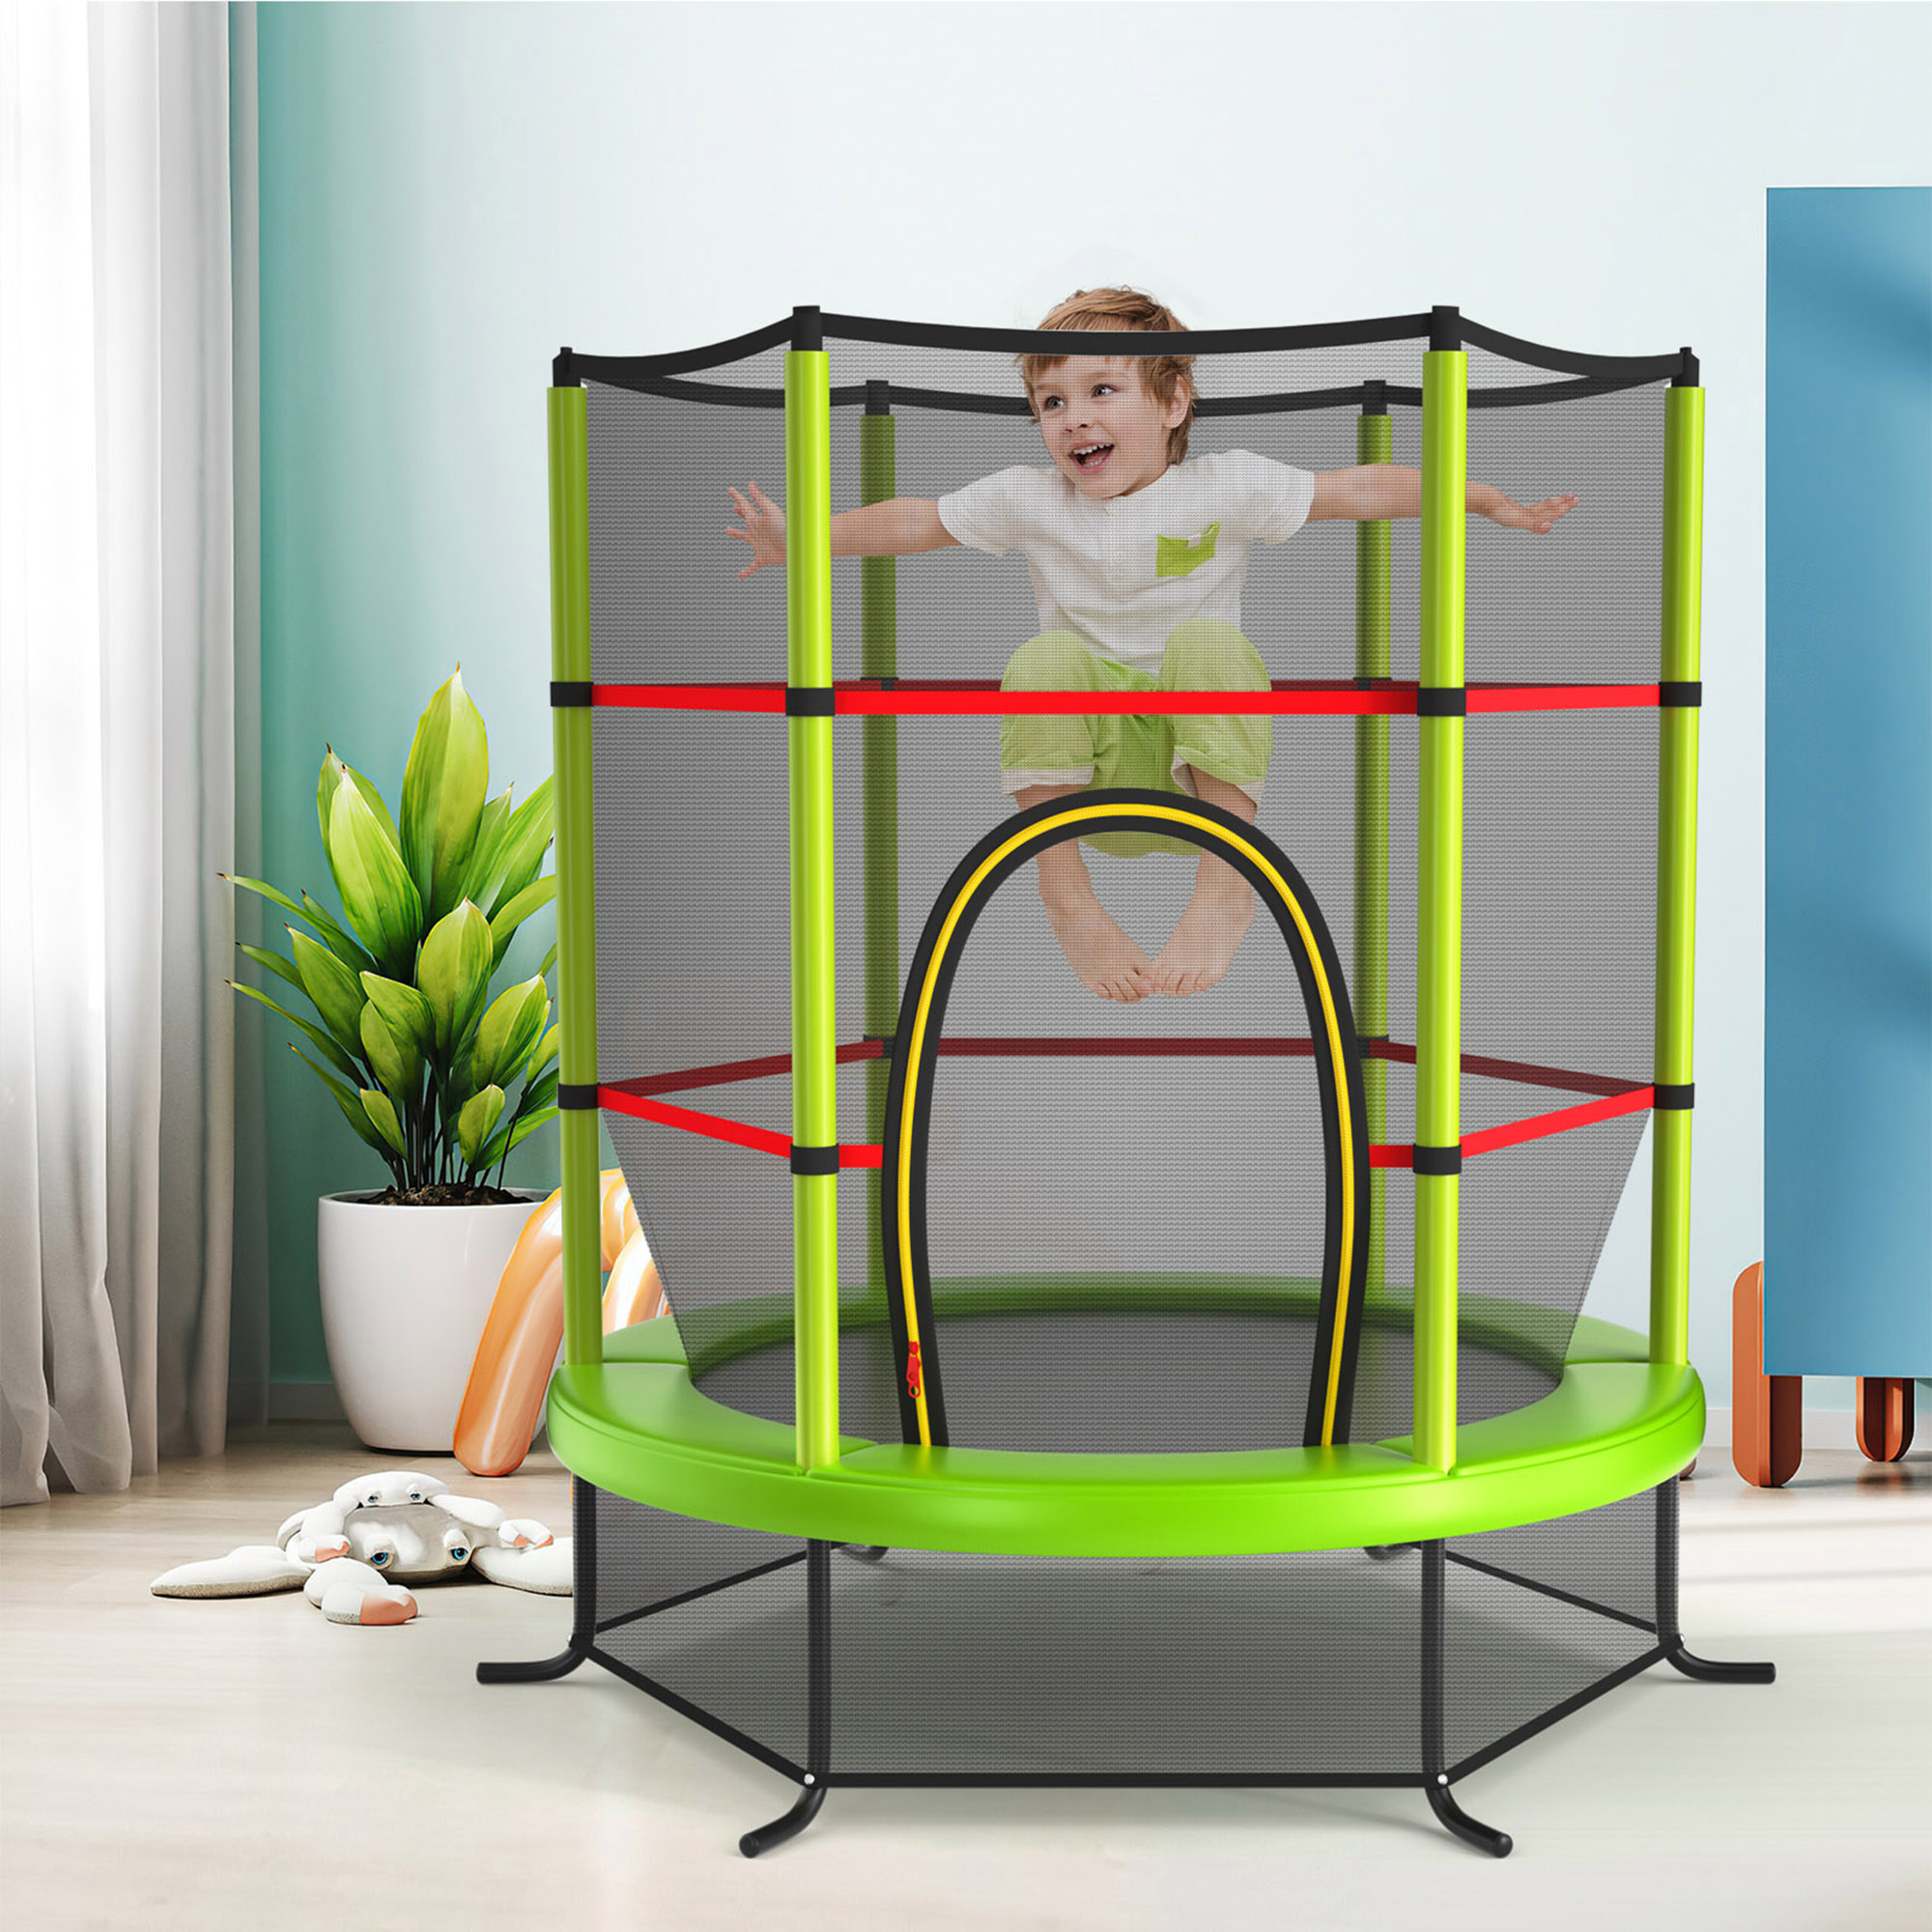 Gymax 55'' Recreational Trampoline for Kids Toddler Trampoline w/ Enclosure Net Green - image 3 of 10